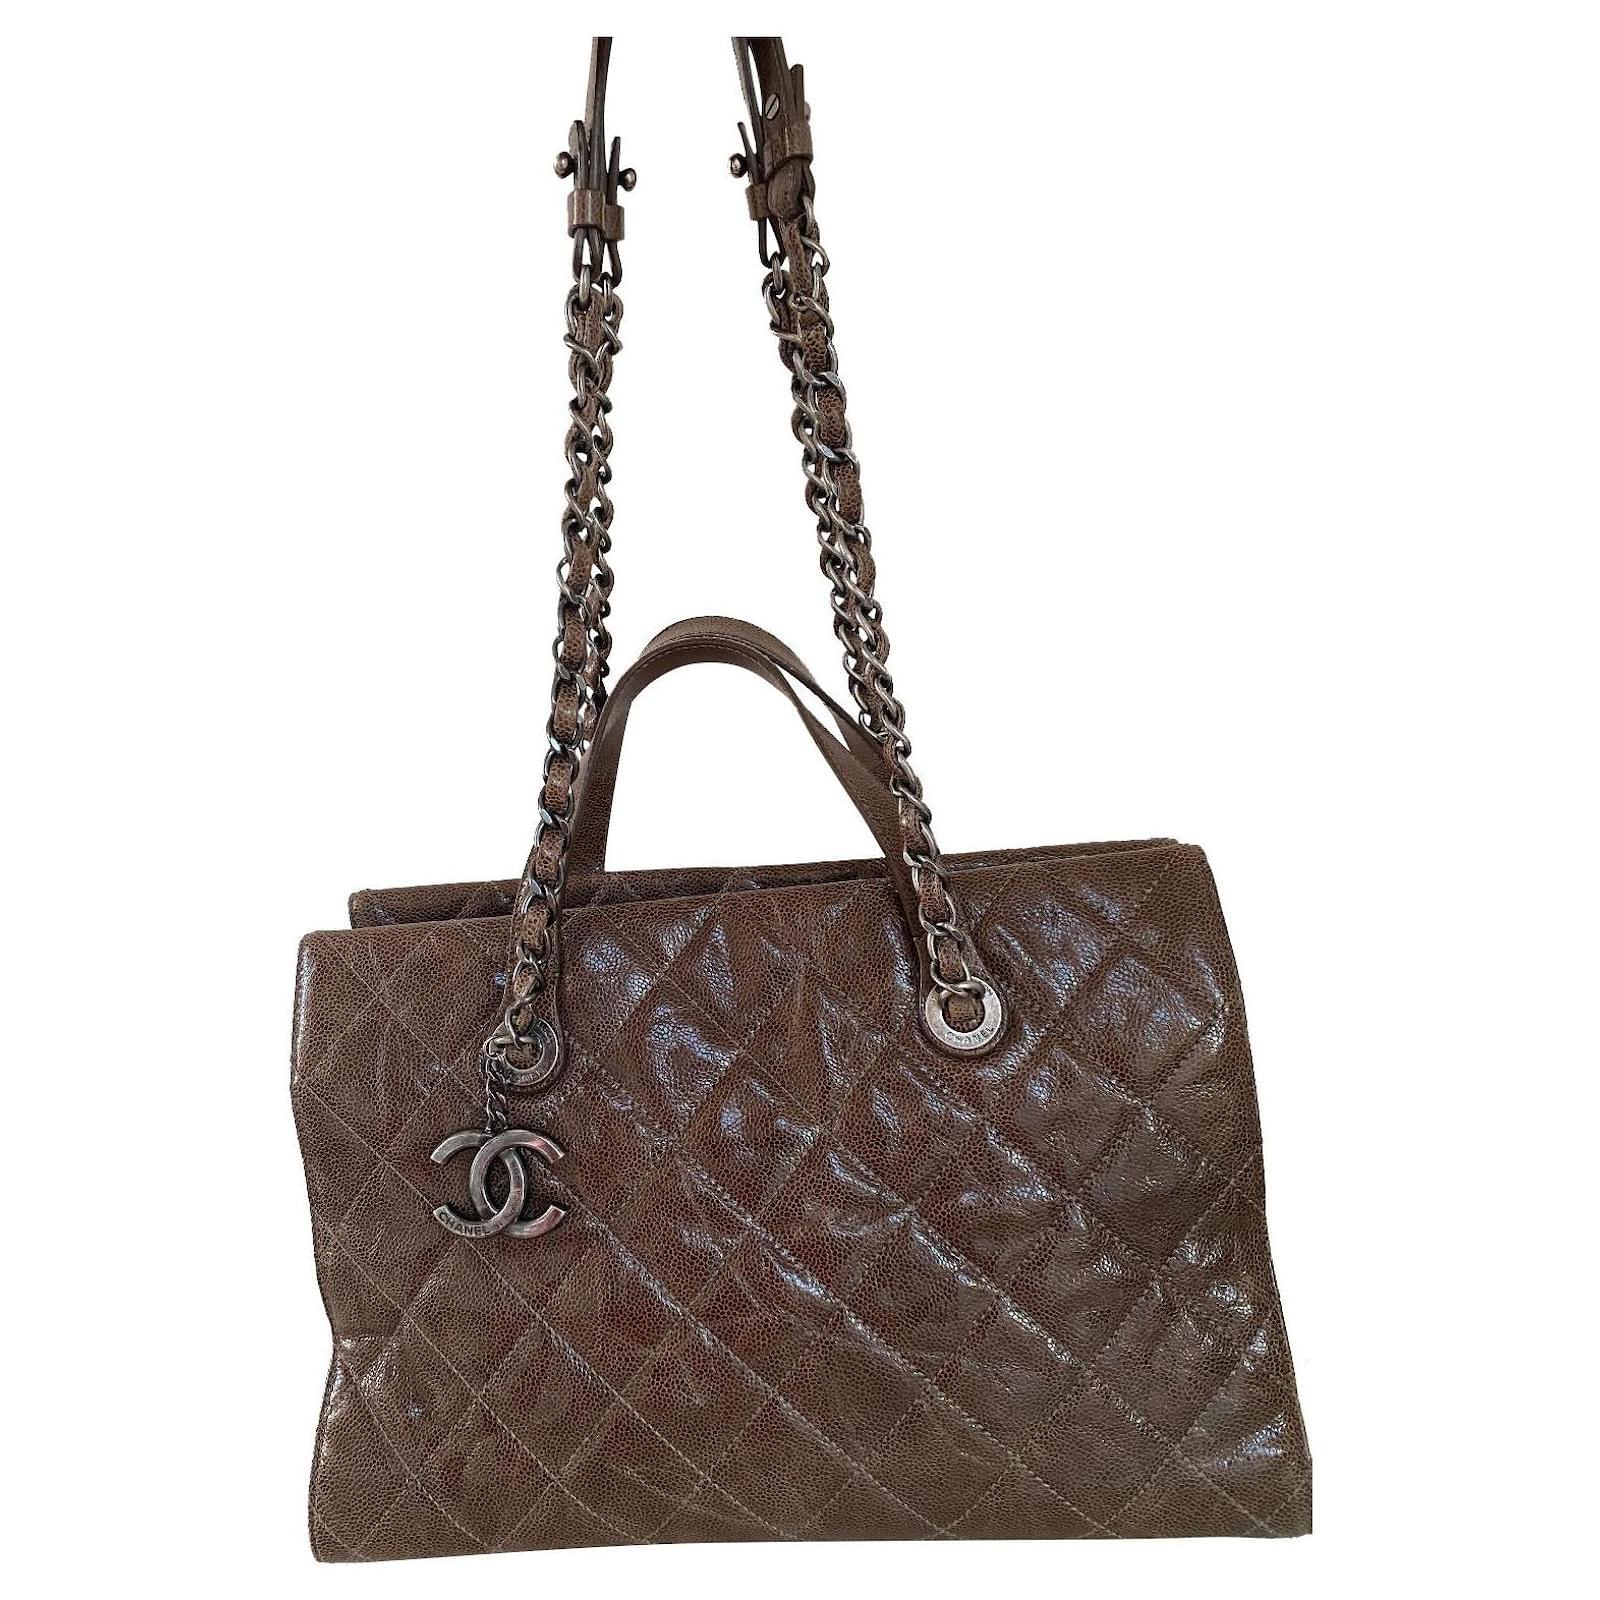 CHANEL, Bags, Chanel Cc Crave Flap Bag Quilted Glazed Caviar Jumbo Brown